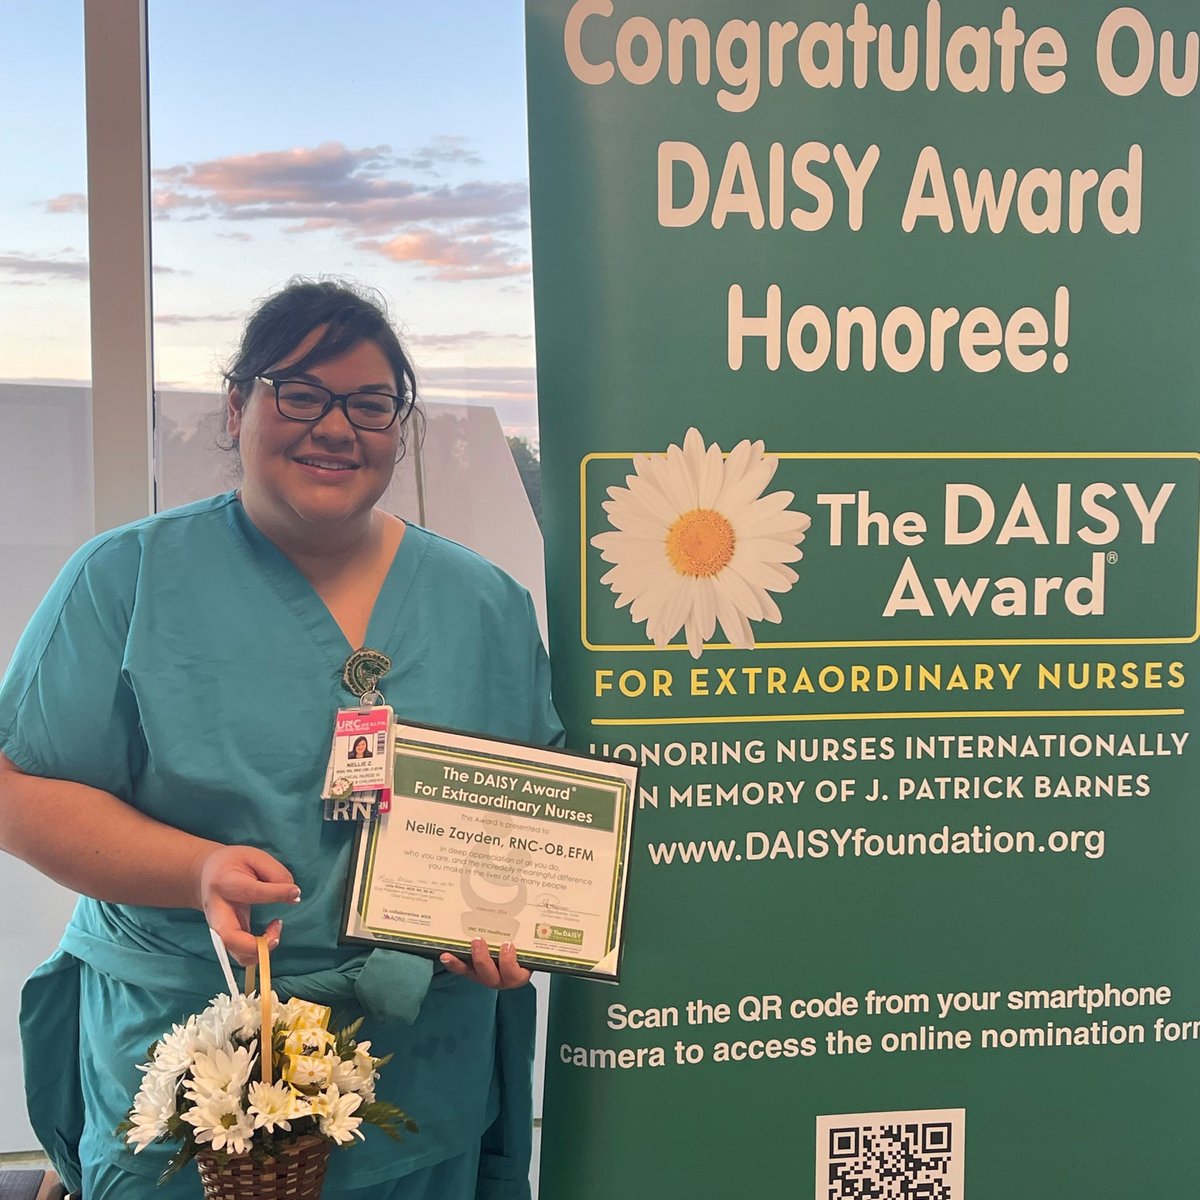 Congratulations to DAISY Award honoree, Nellie Zayden! She is a Labor & Delivery nurse at UNC Health Rex Holly Springs hospital. The DAISY Award celebrates nurses for their extraordinary care.  Thank you Nellie for all that you do for our patients! 🌼 #OneGreatTeam #DAISYAward